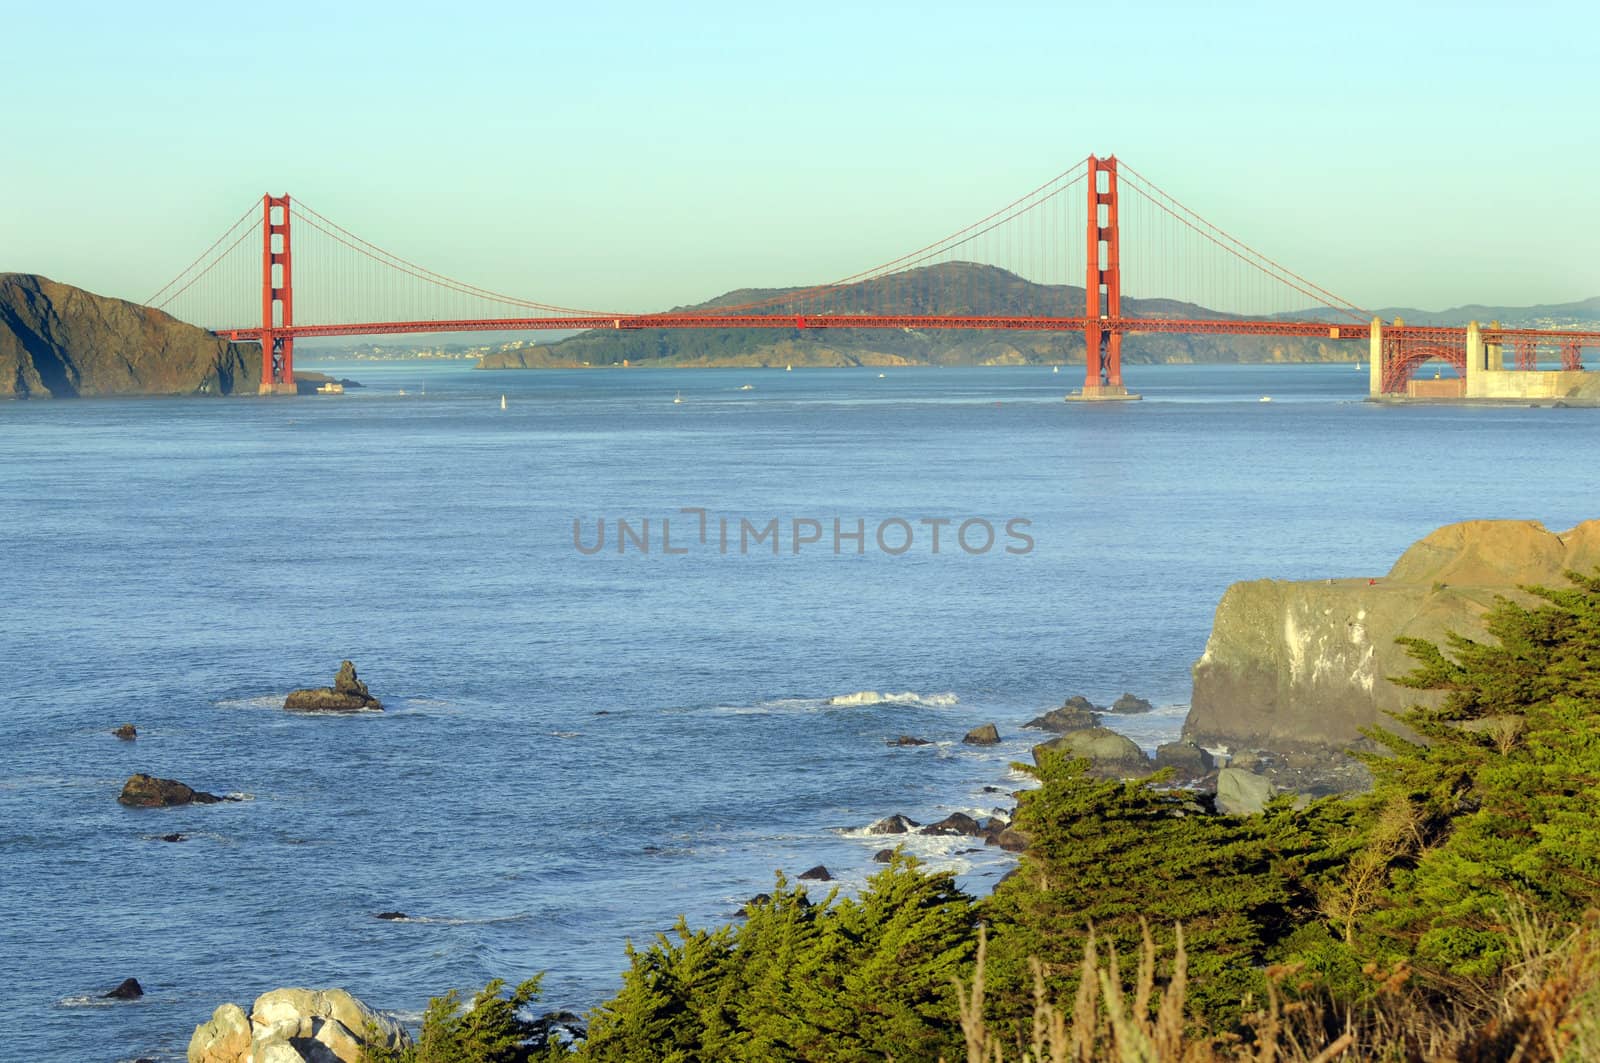 Golden gate bridge from the Presidio, sunset with sail boats in the bay